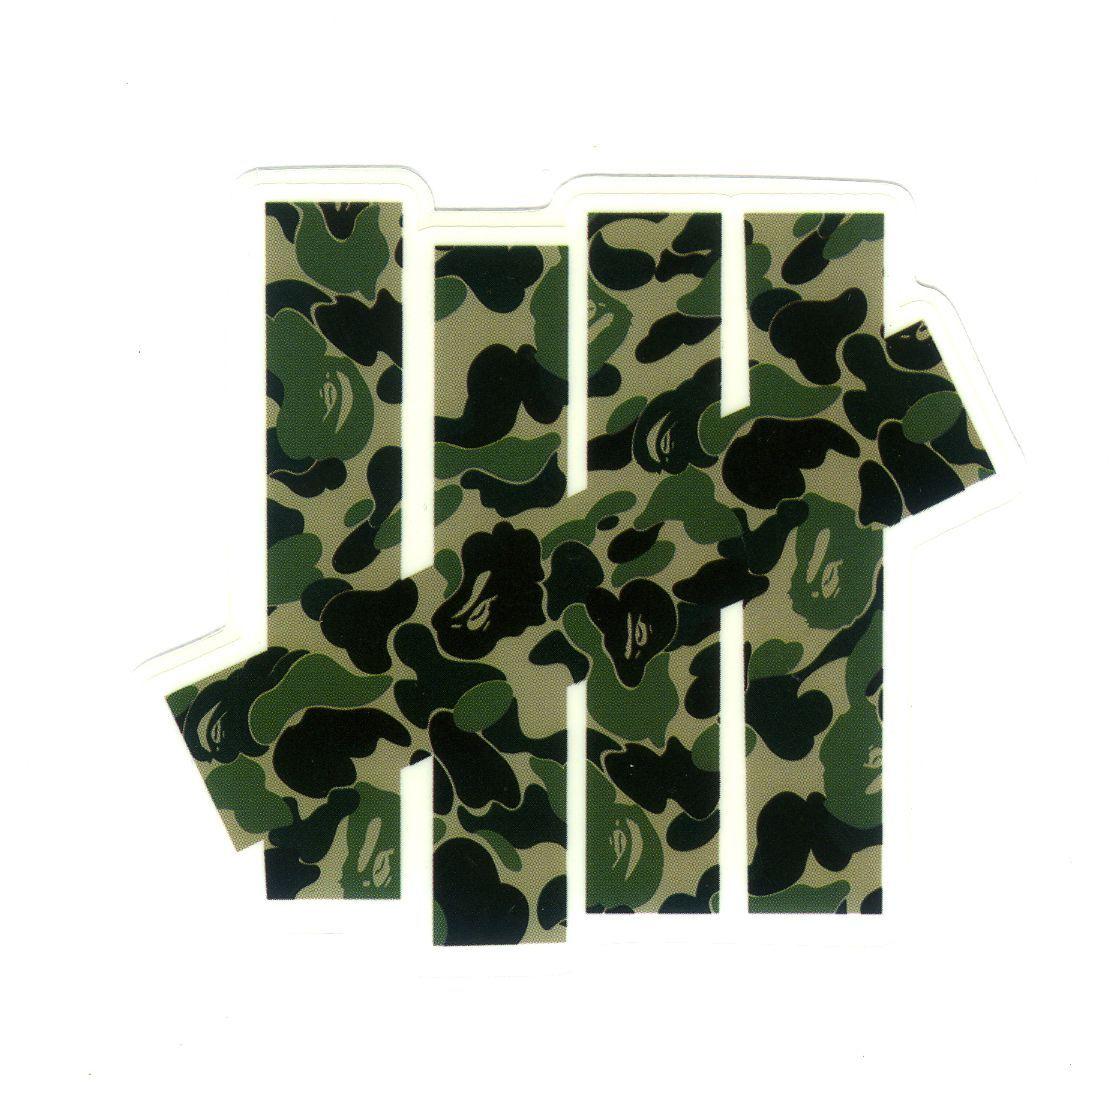 Undefeated Camo Logo - 1251 Undefeated x A Bathing Ape Camo , Height 6 cm, decal sticker ...